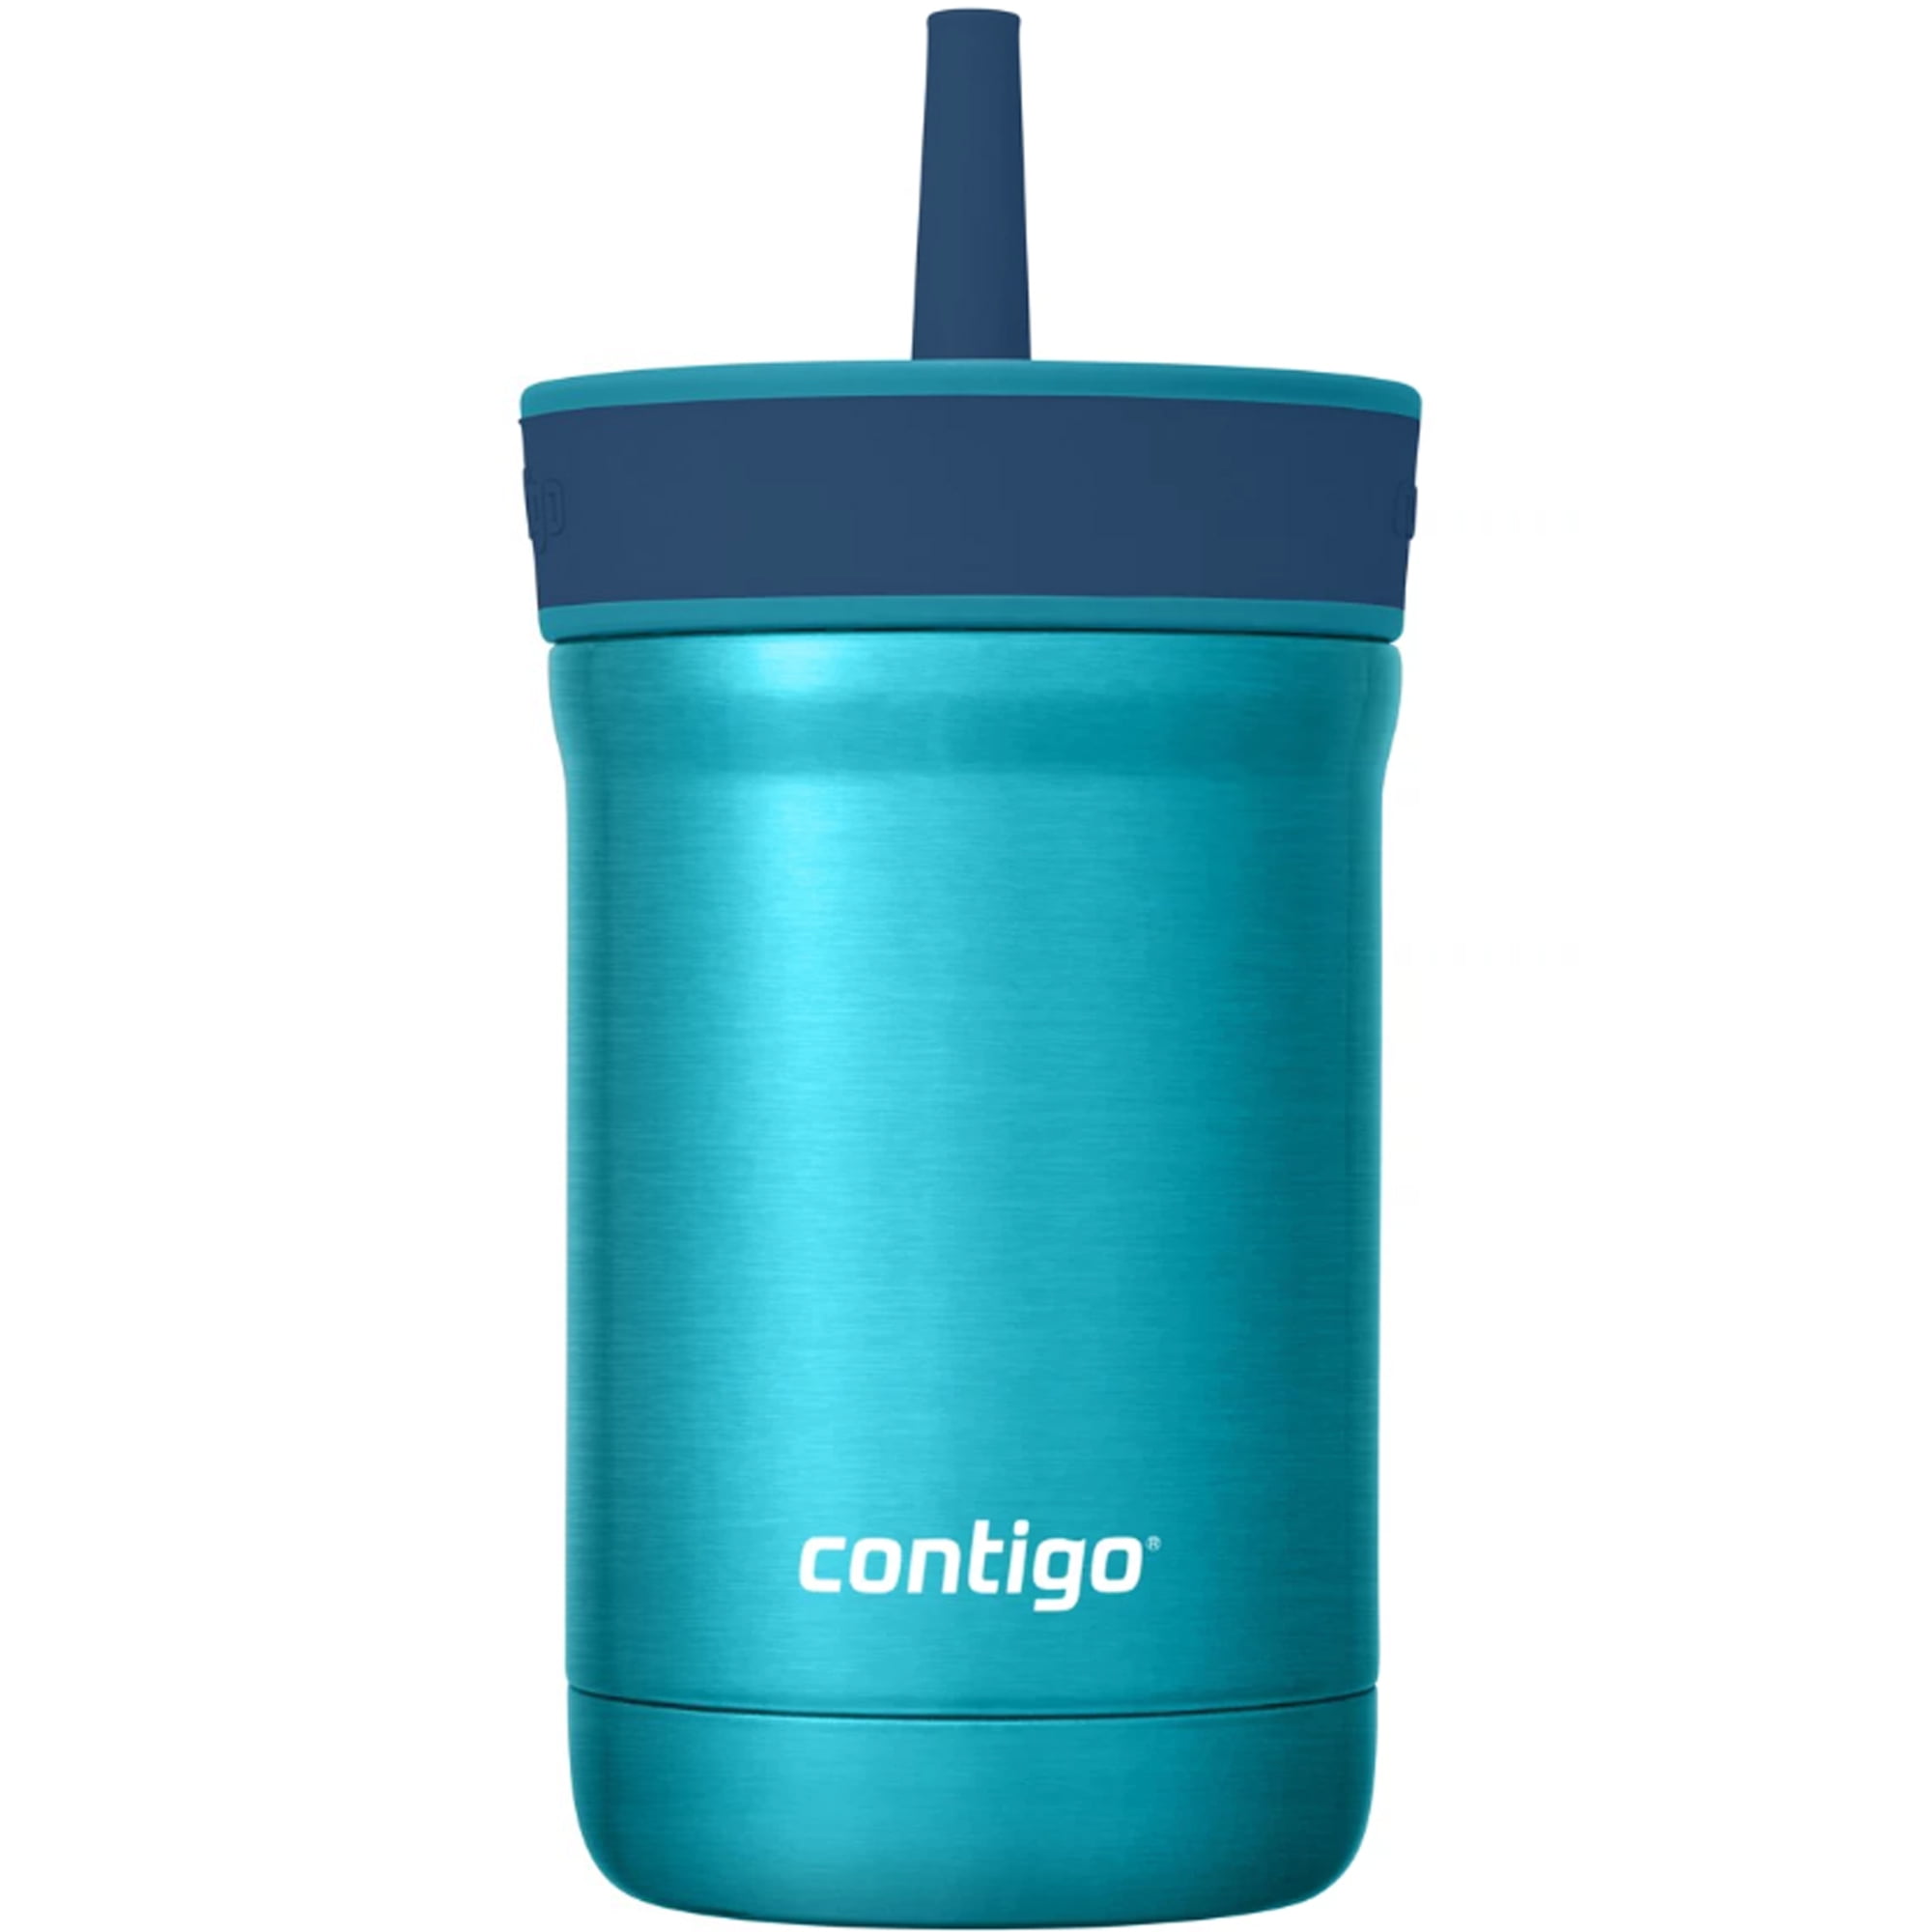 Contigo 12 oz. Kid's Spill-Proof Insulated Stainless Steel Tumbler